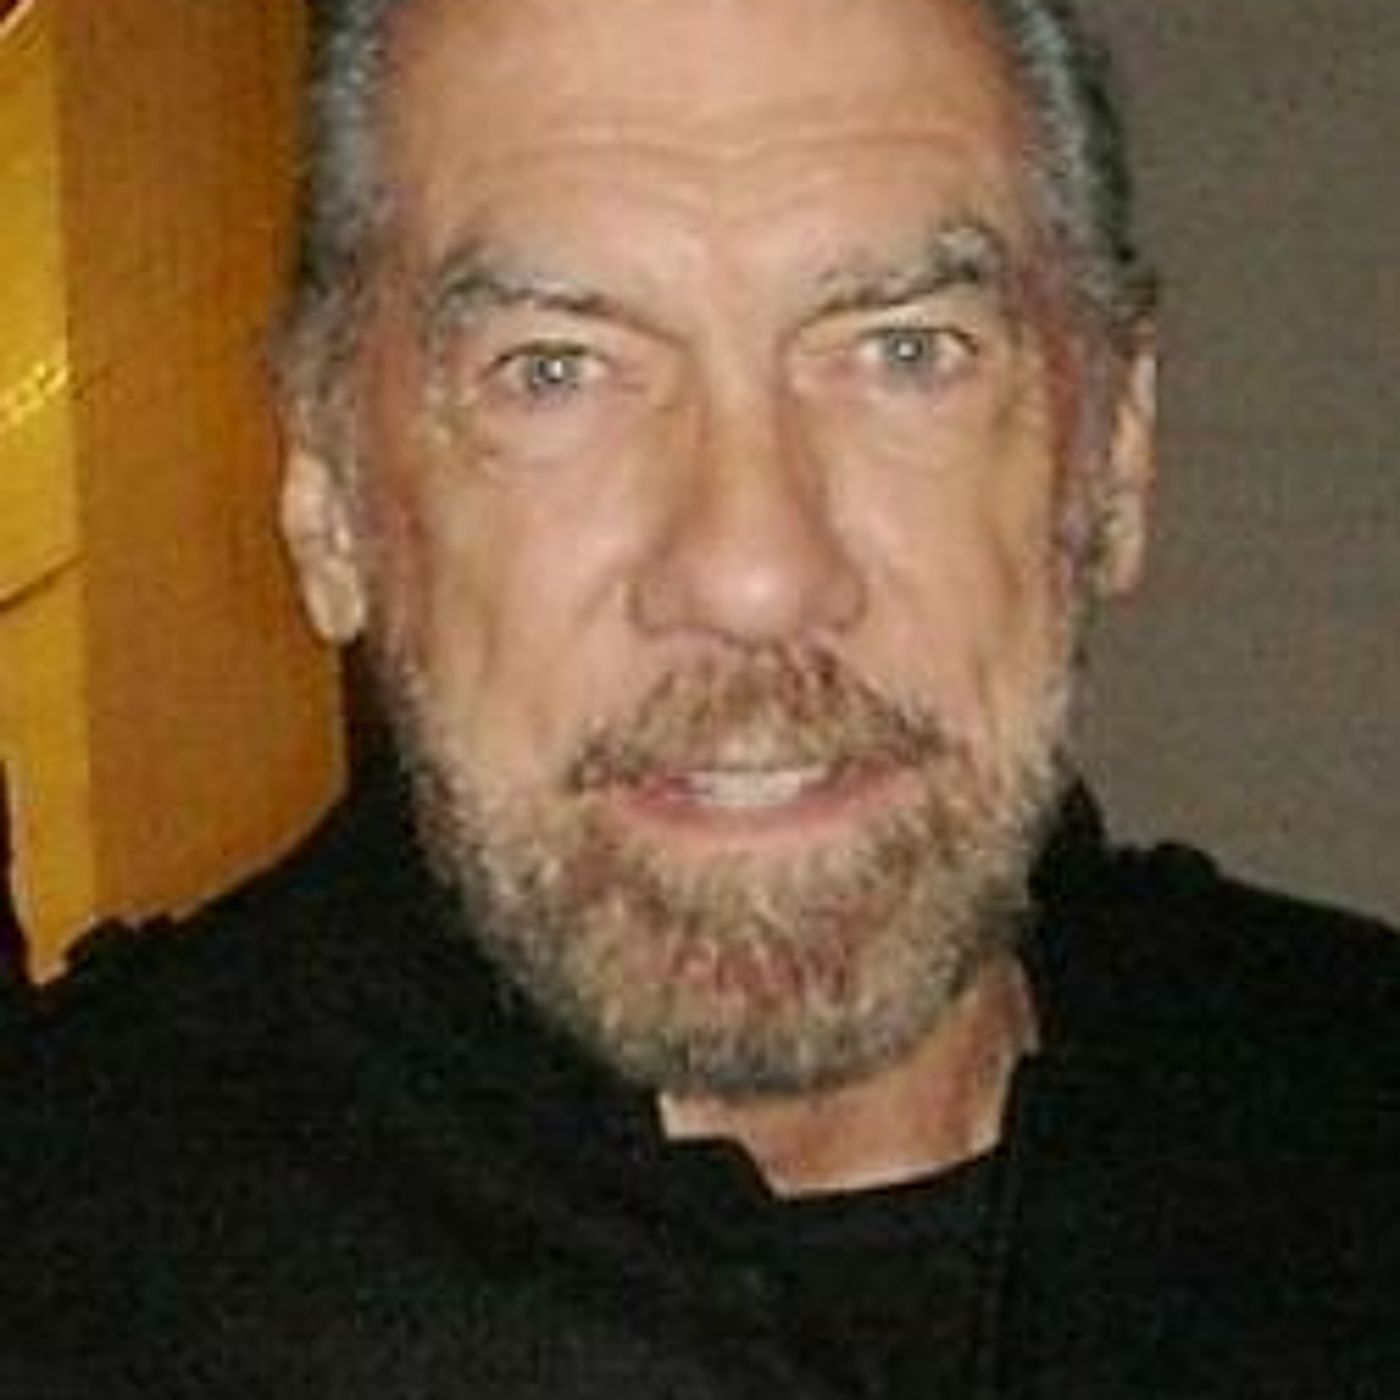 John Paul DeJoria founder of Paul Mitchell Systems and Patron Spirits is interviewed by David Cogan of Eliances Heroes radio show amfm